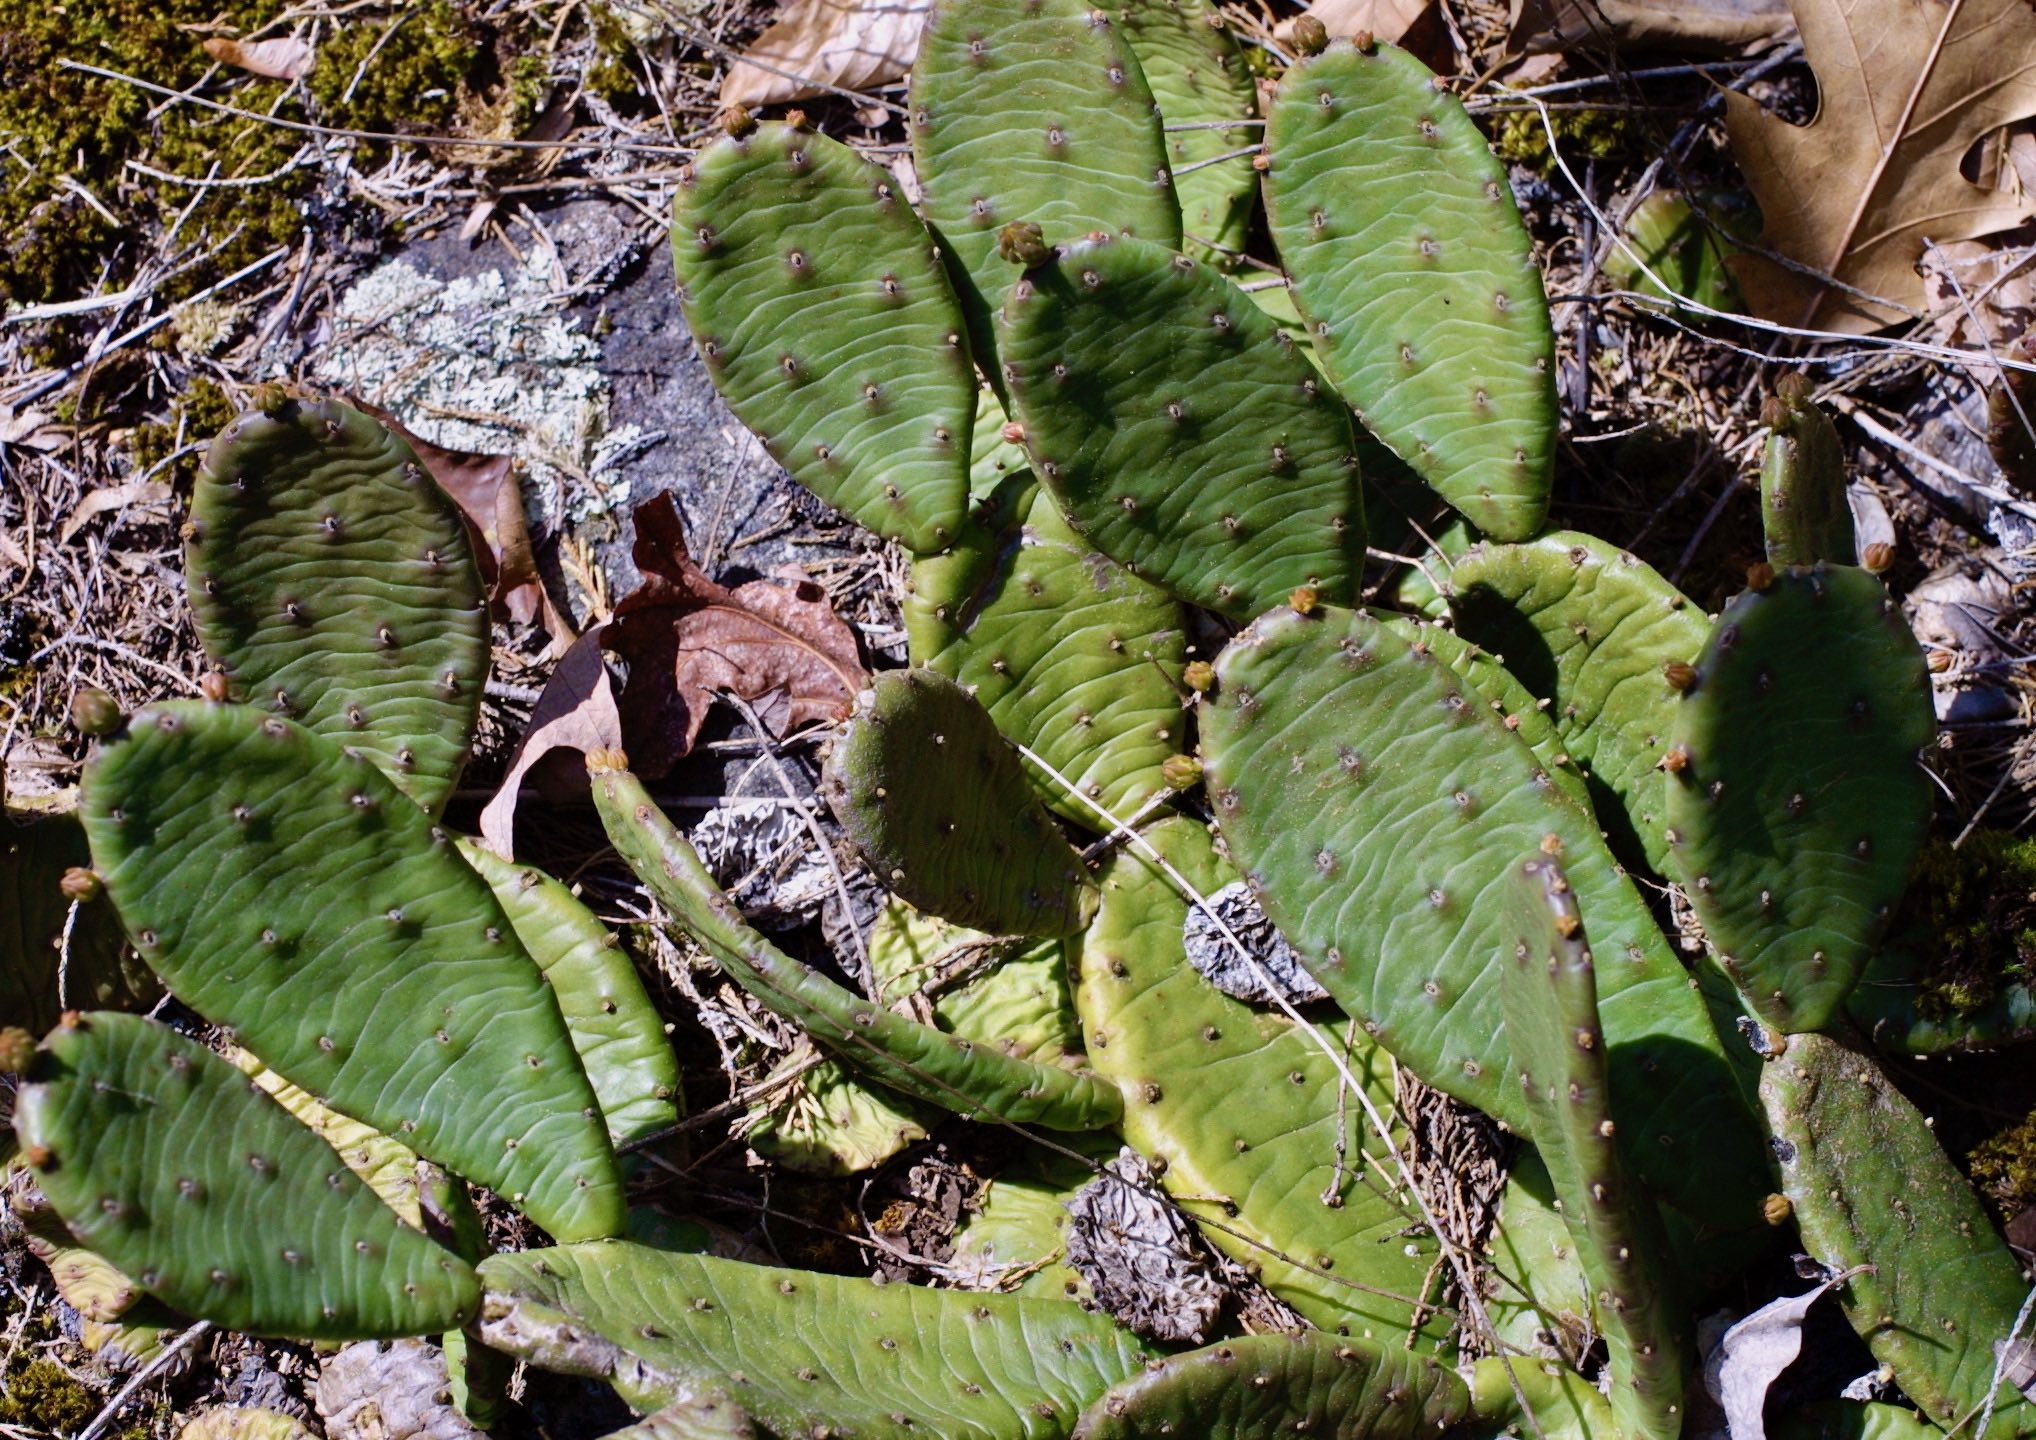 The Scientific Name is Opuntia humifusa [=Opuntia compressa]. You will likely hear them called Eastern Prickly Pear, Devil's-tongue. This picture shows the Jointed pads of Opuntia humifusa [=Opuntia compressa]